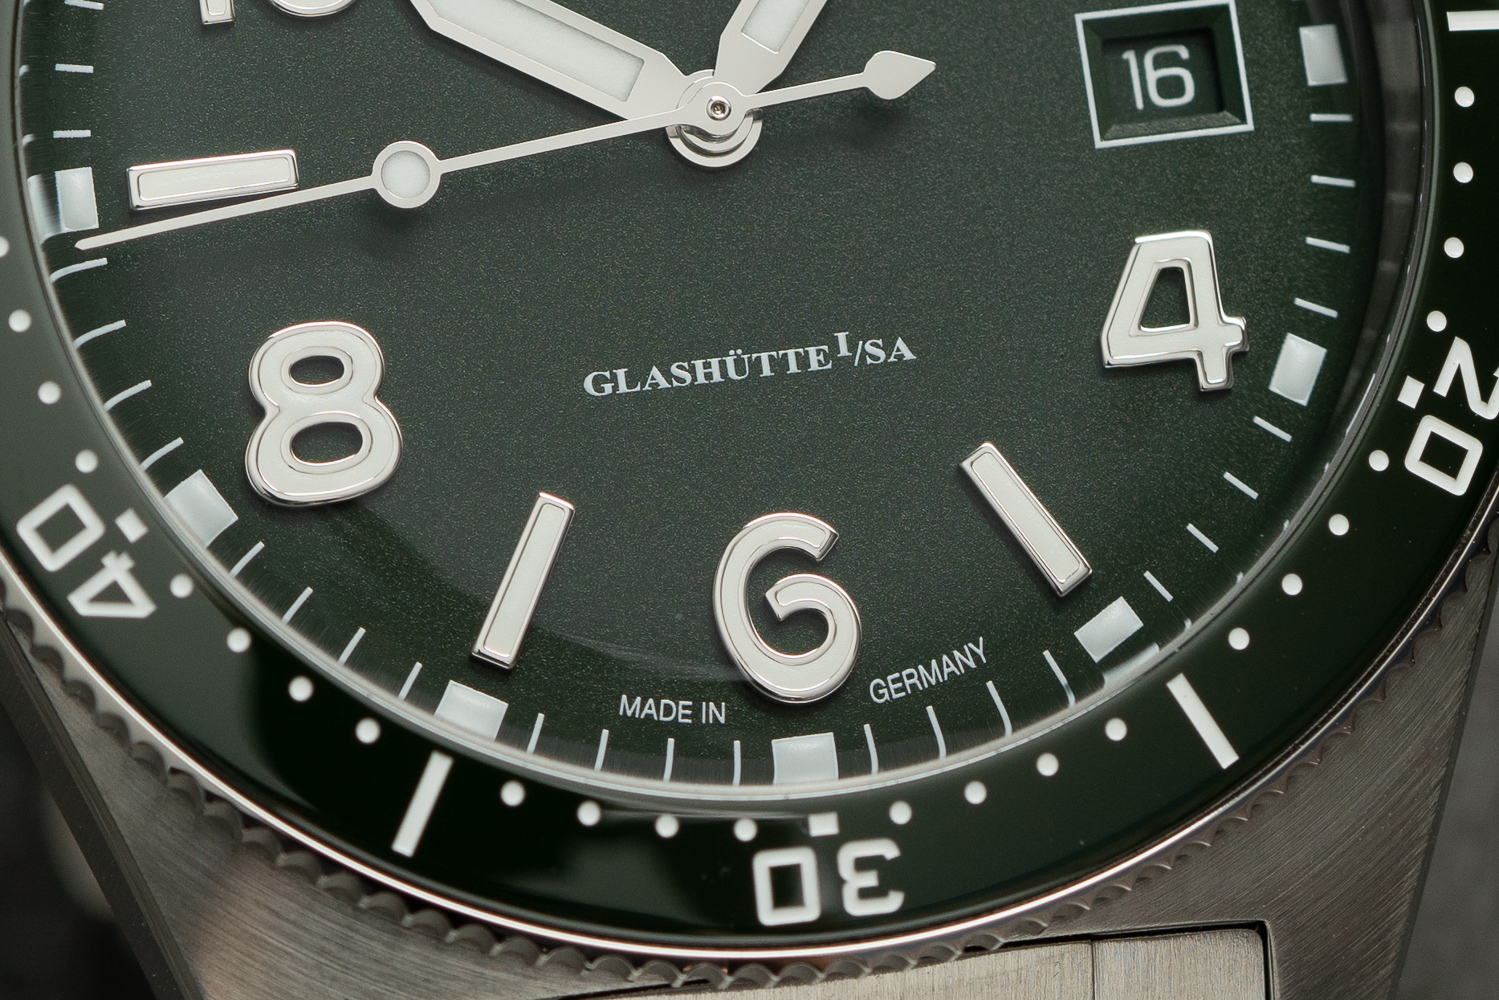 Glashütte Original SeaQrich green lacquered dial, silver applied numerals, SuperLumiNova inlaid indices and hands. Photo credit: Scott Sitkiewitz